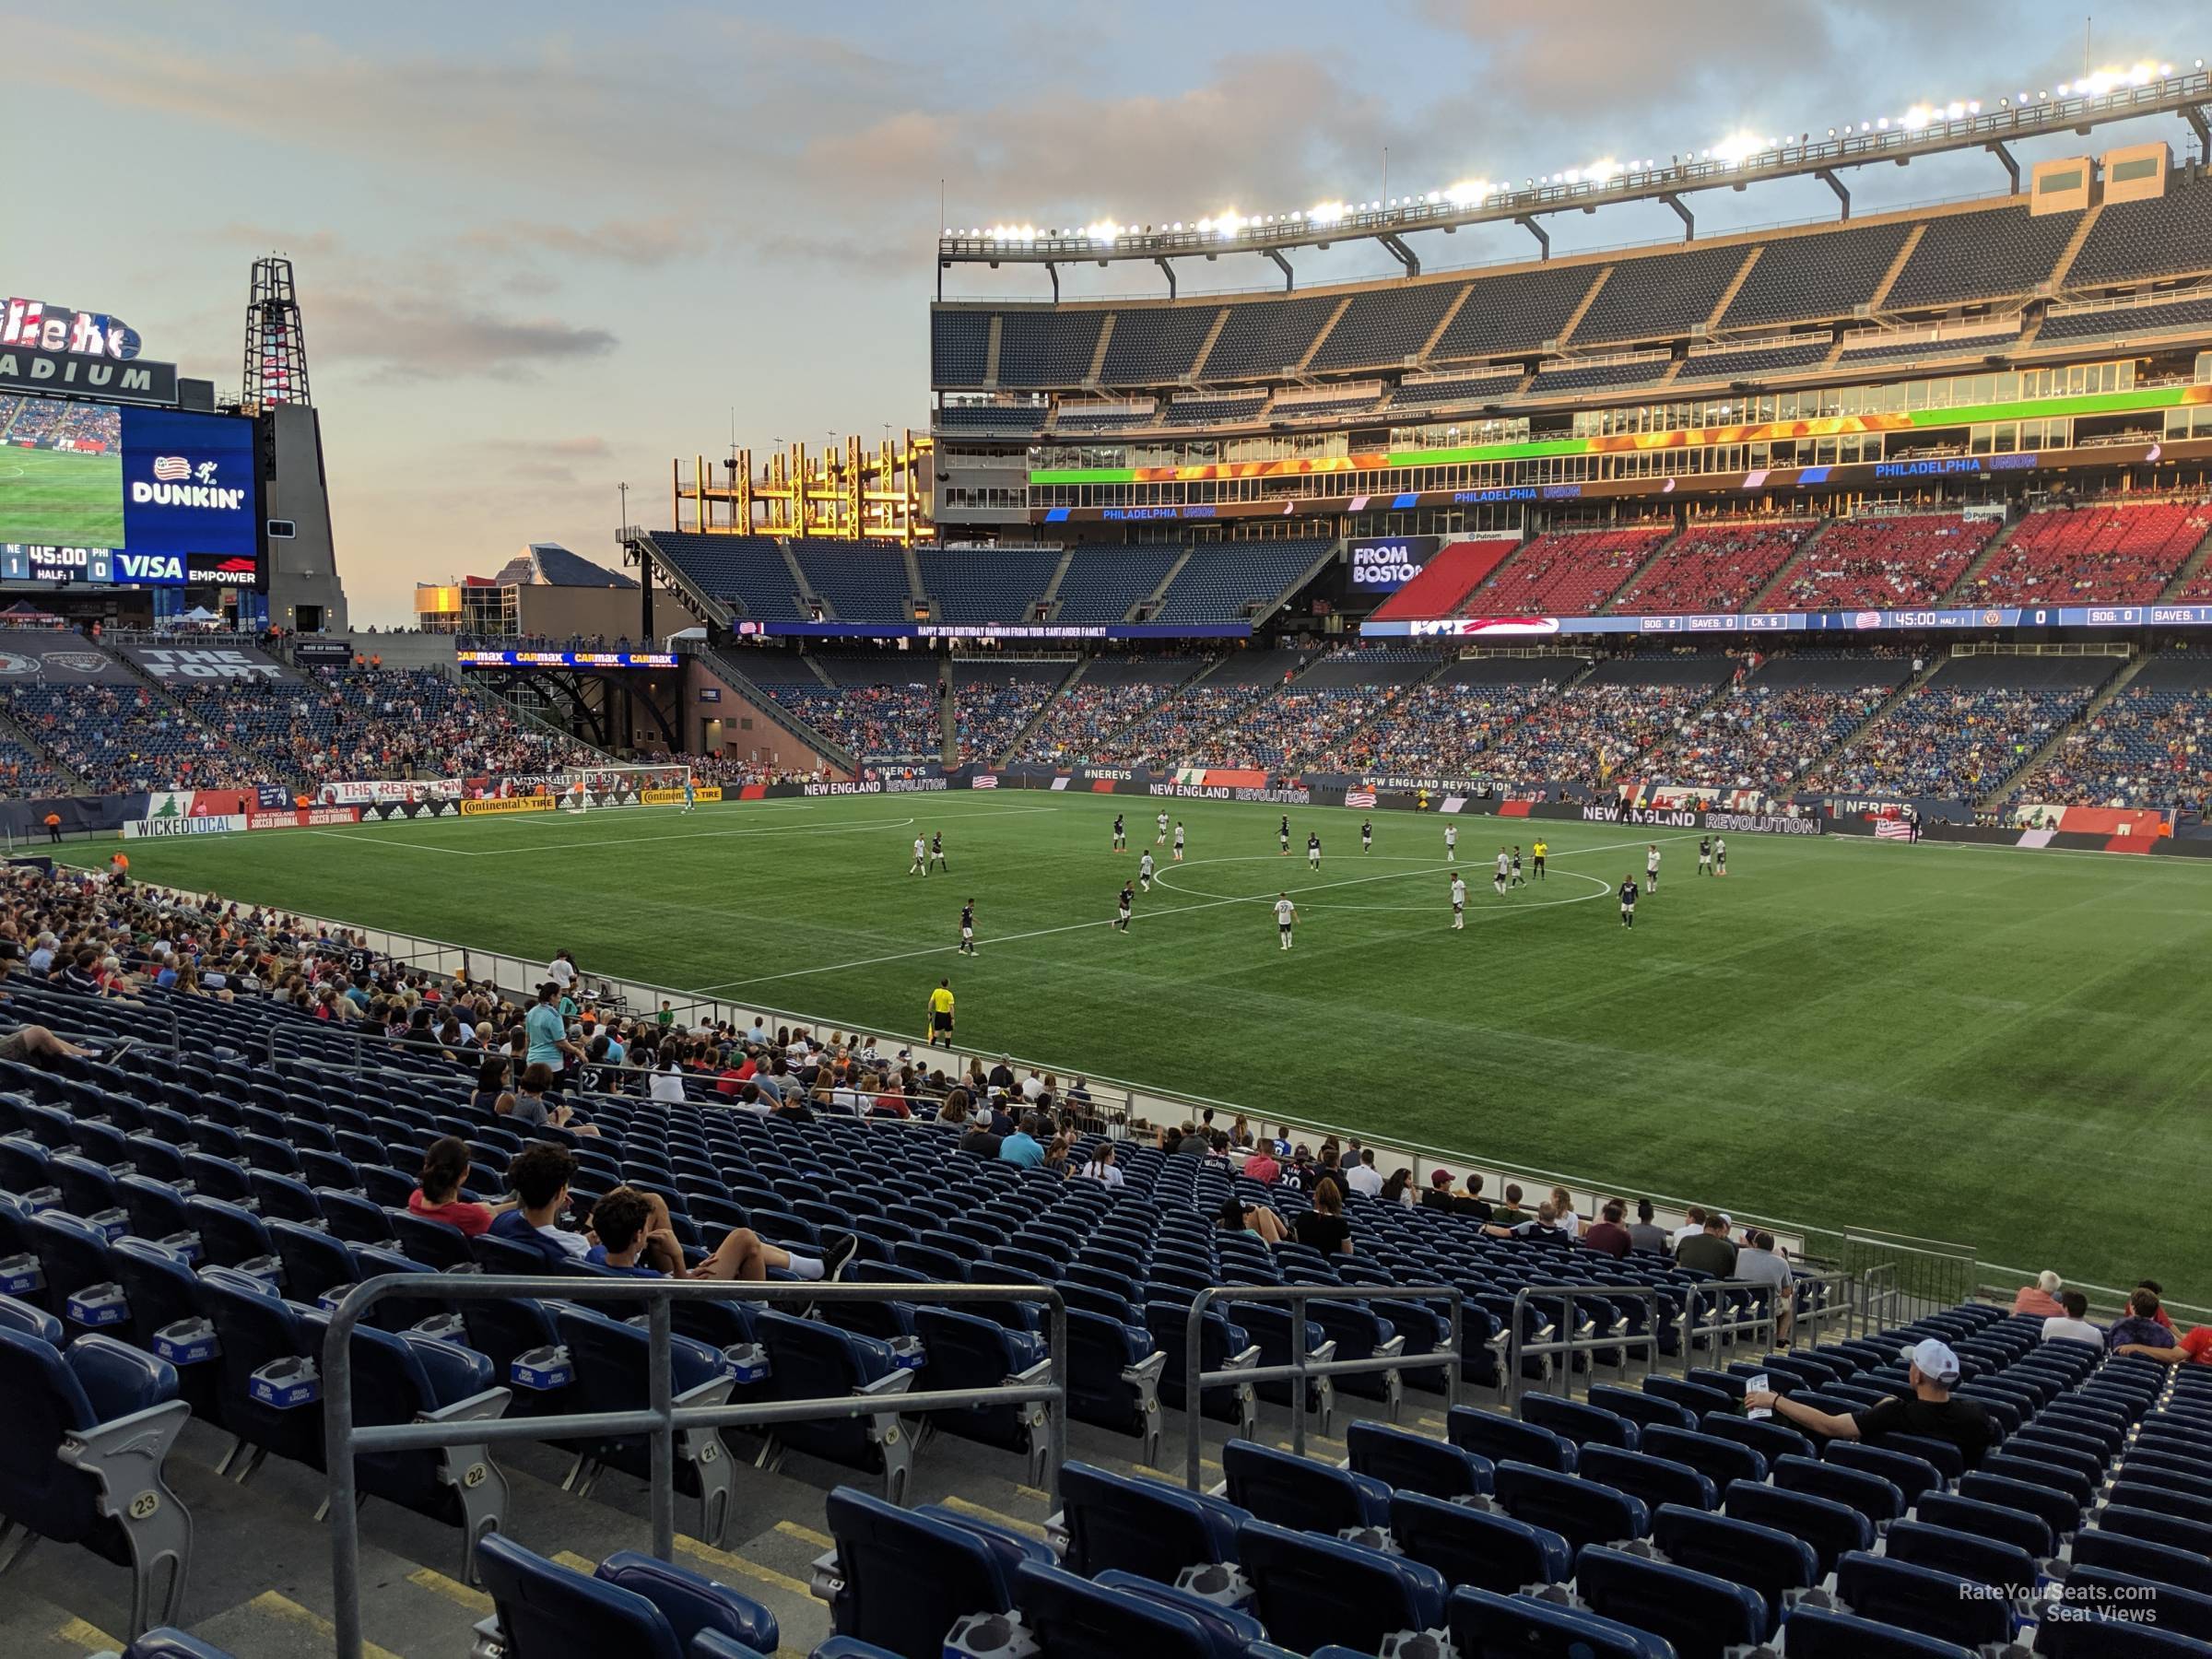 section 128, row 25 seat view  for soccer - gillette stadium